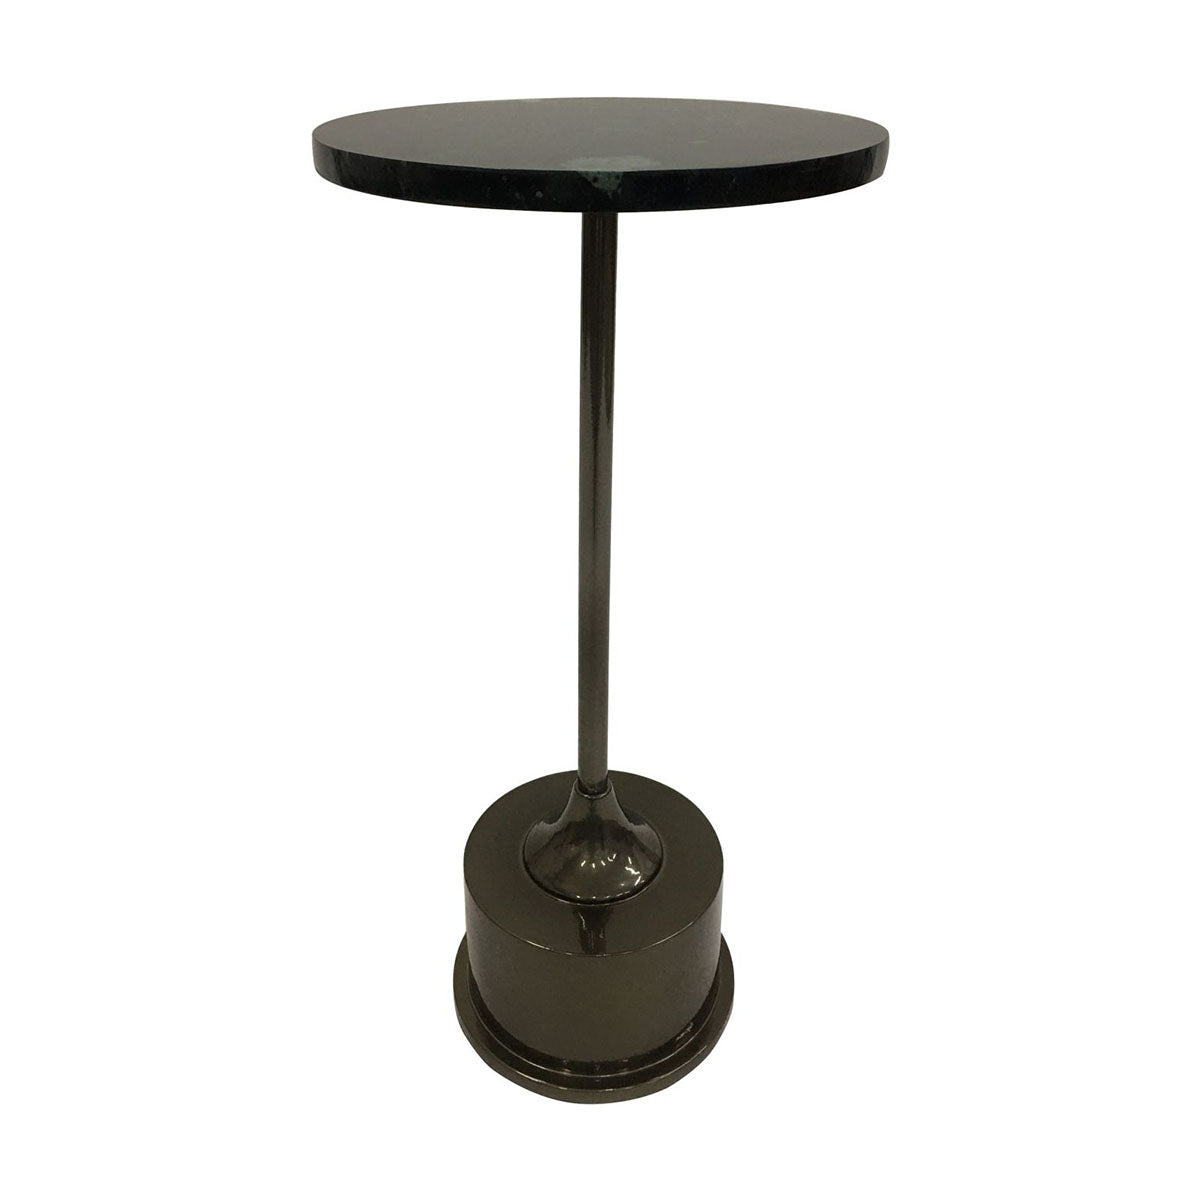 Northwich Side Table Metallic Black Nickel Finish on Round Green Marble Base